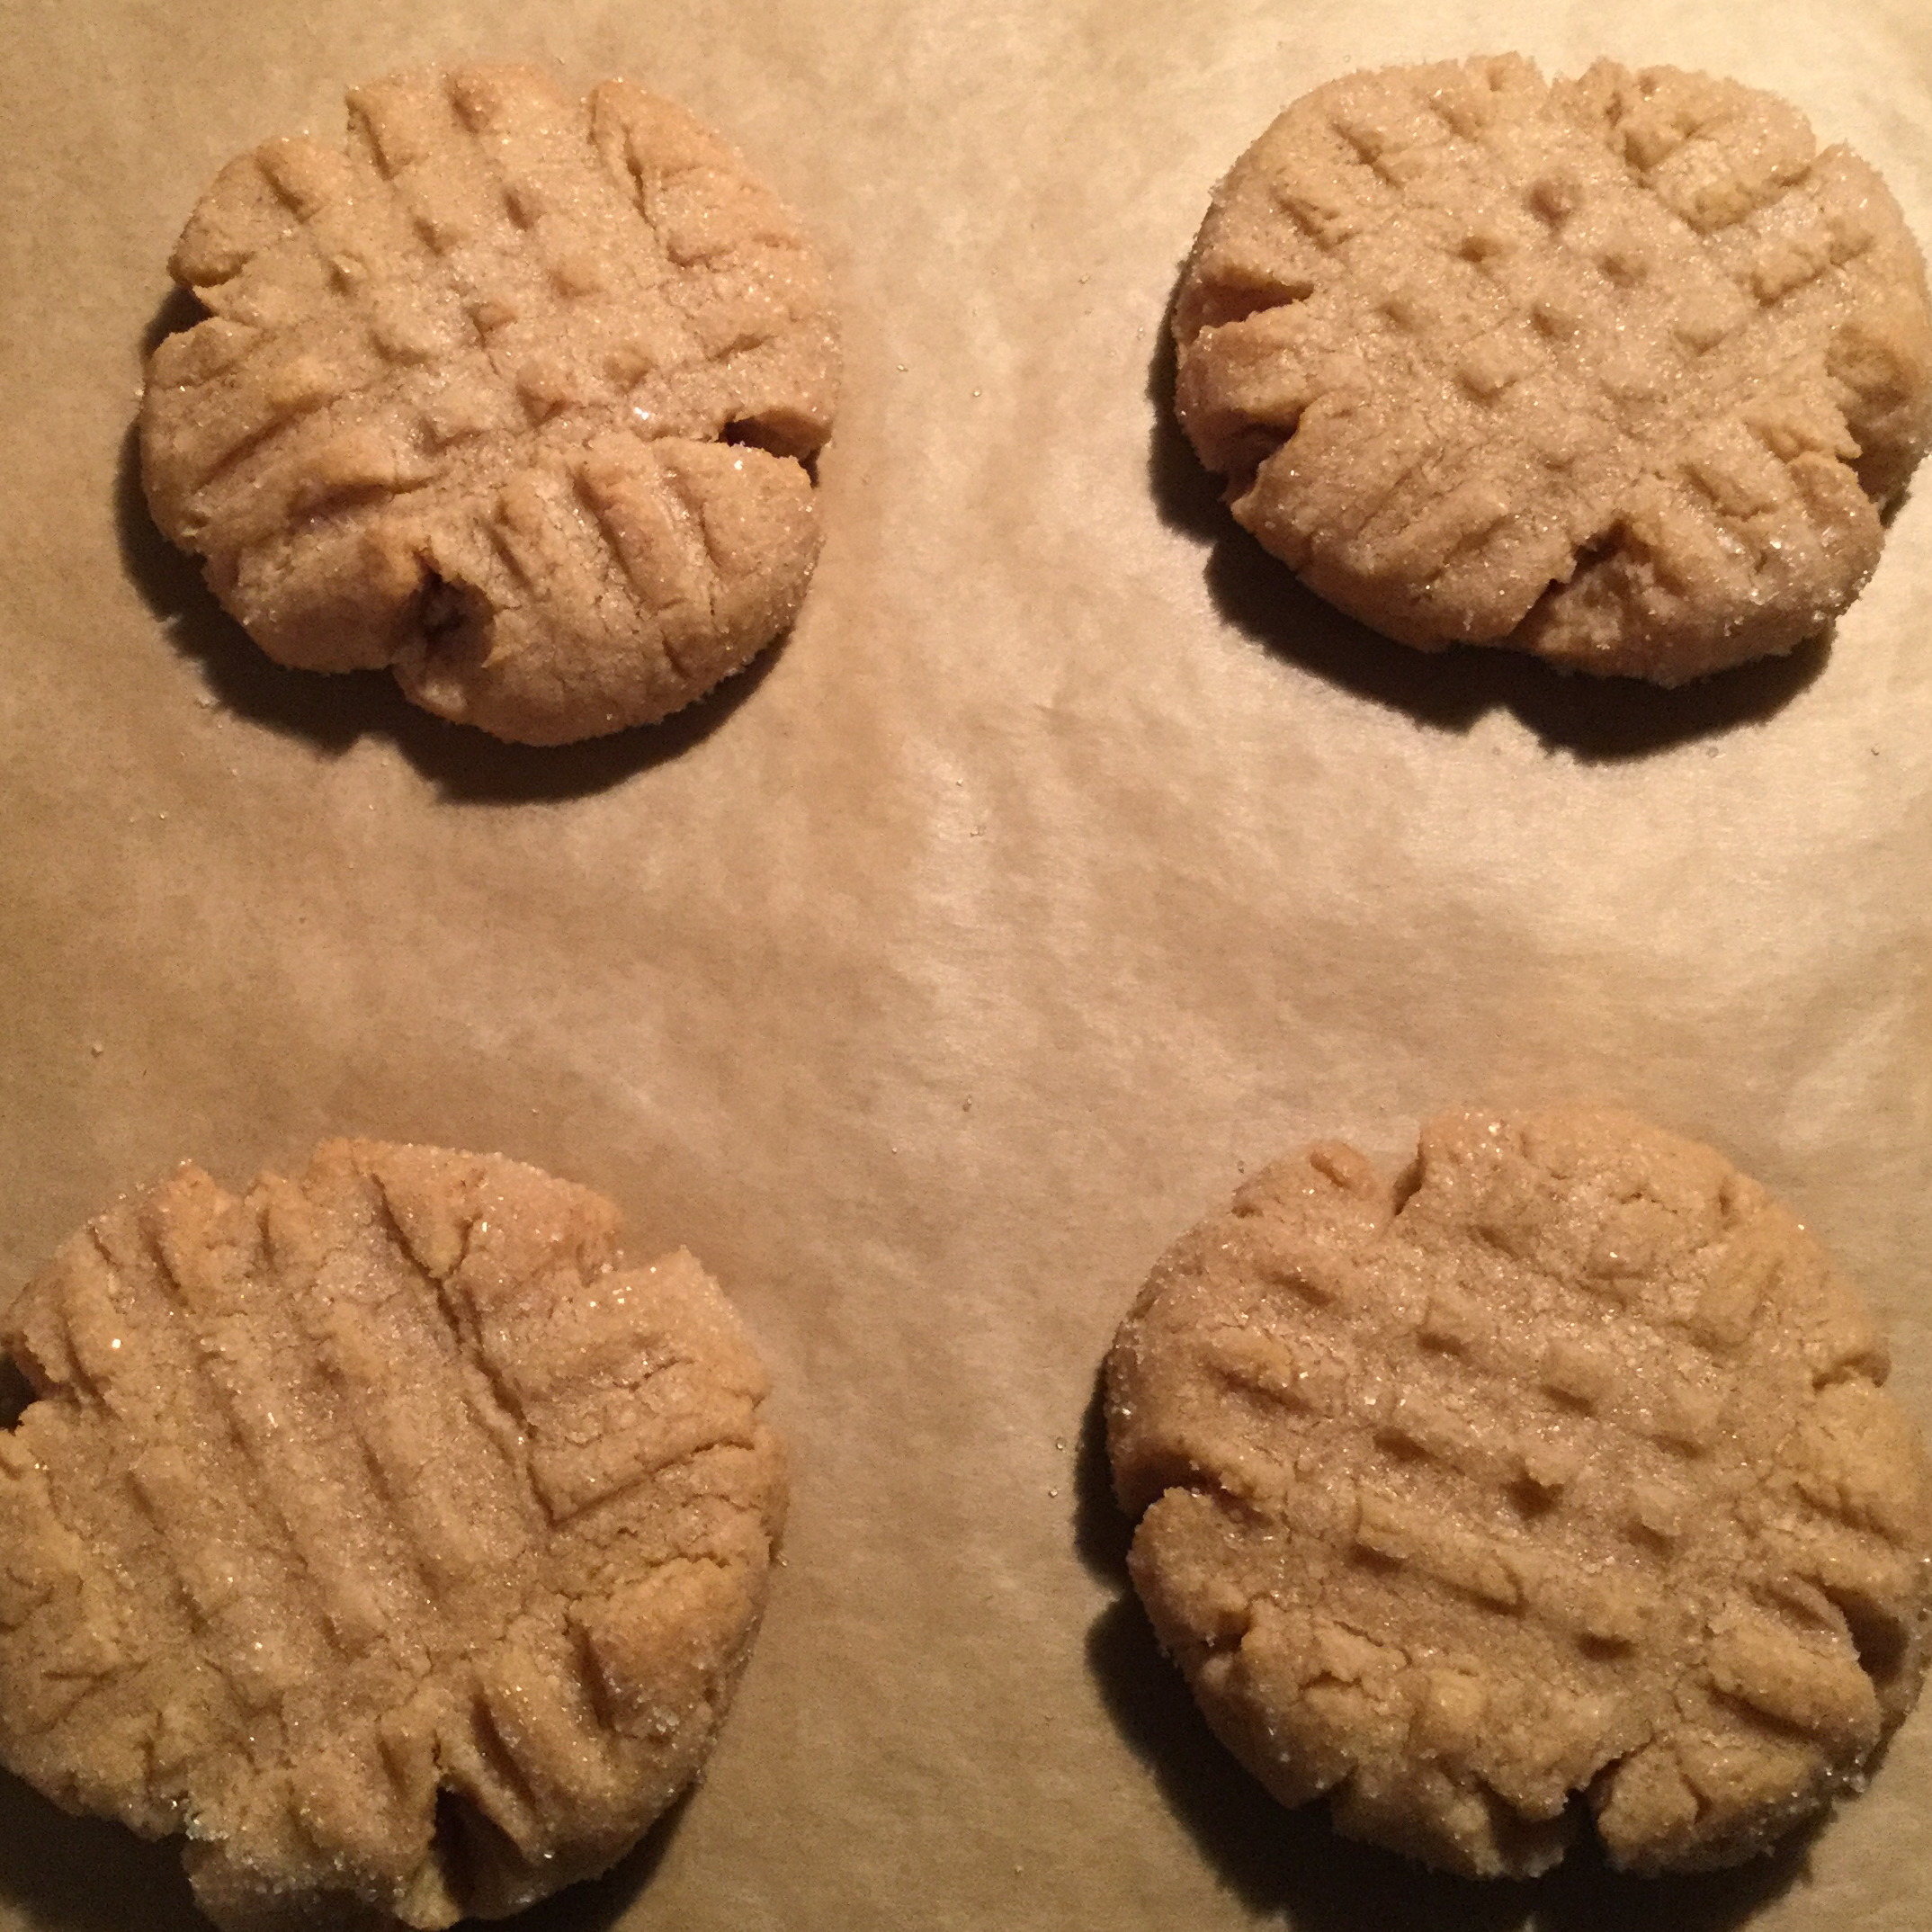 Old Fashioned Peanut Butter Cookies 